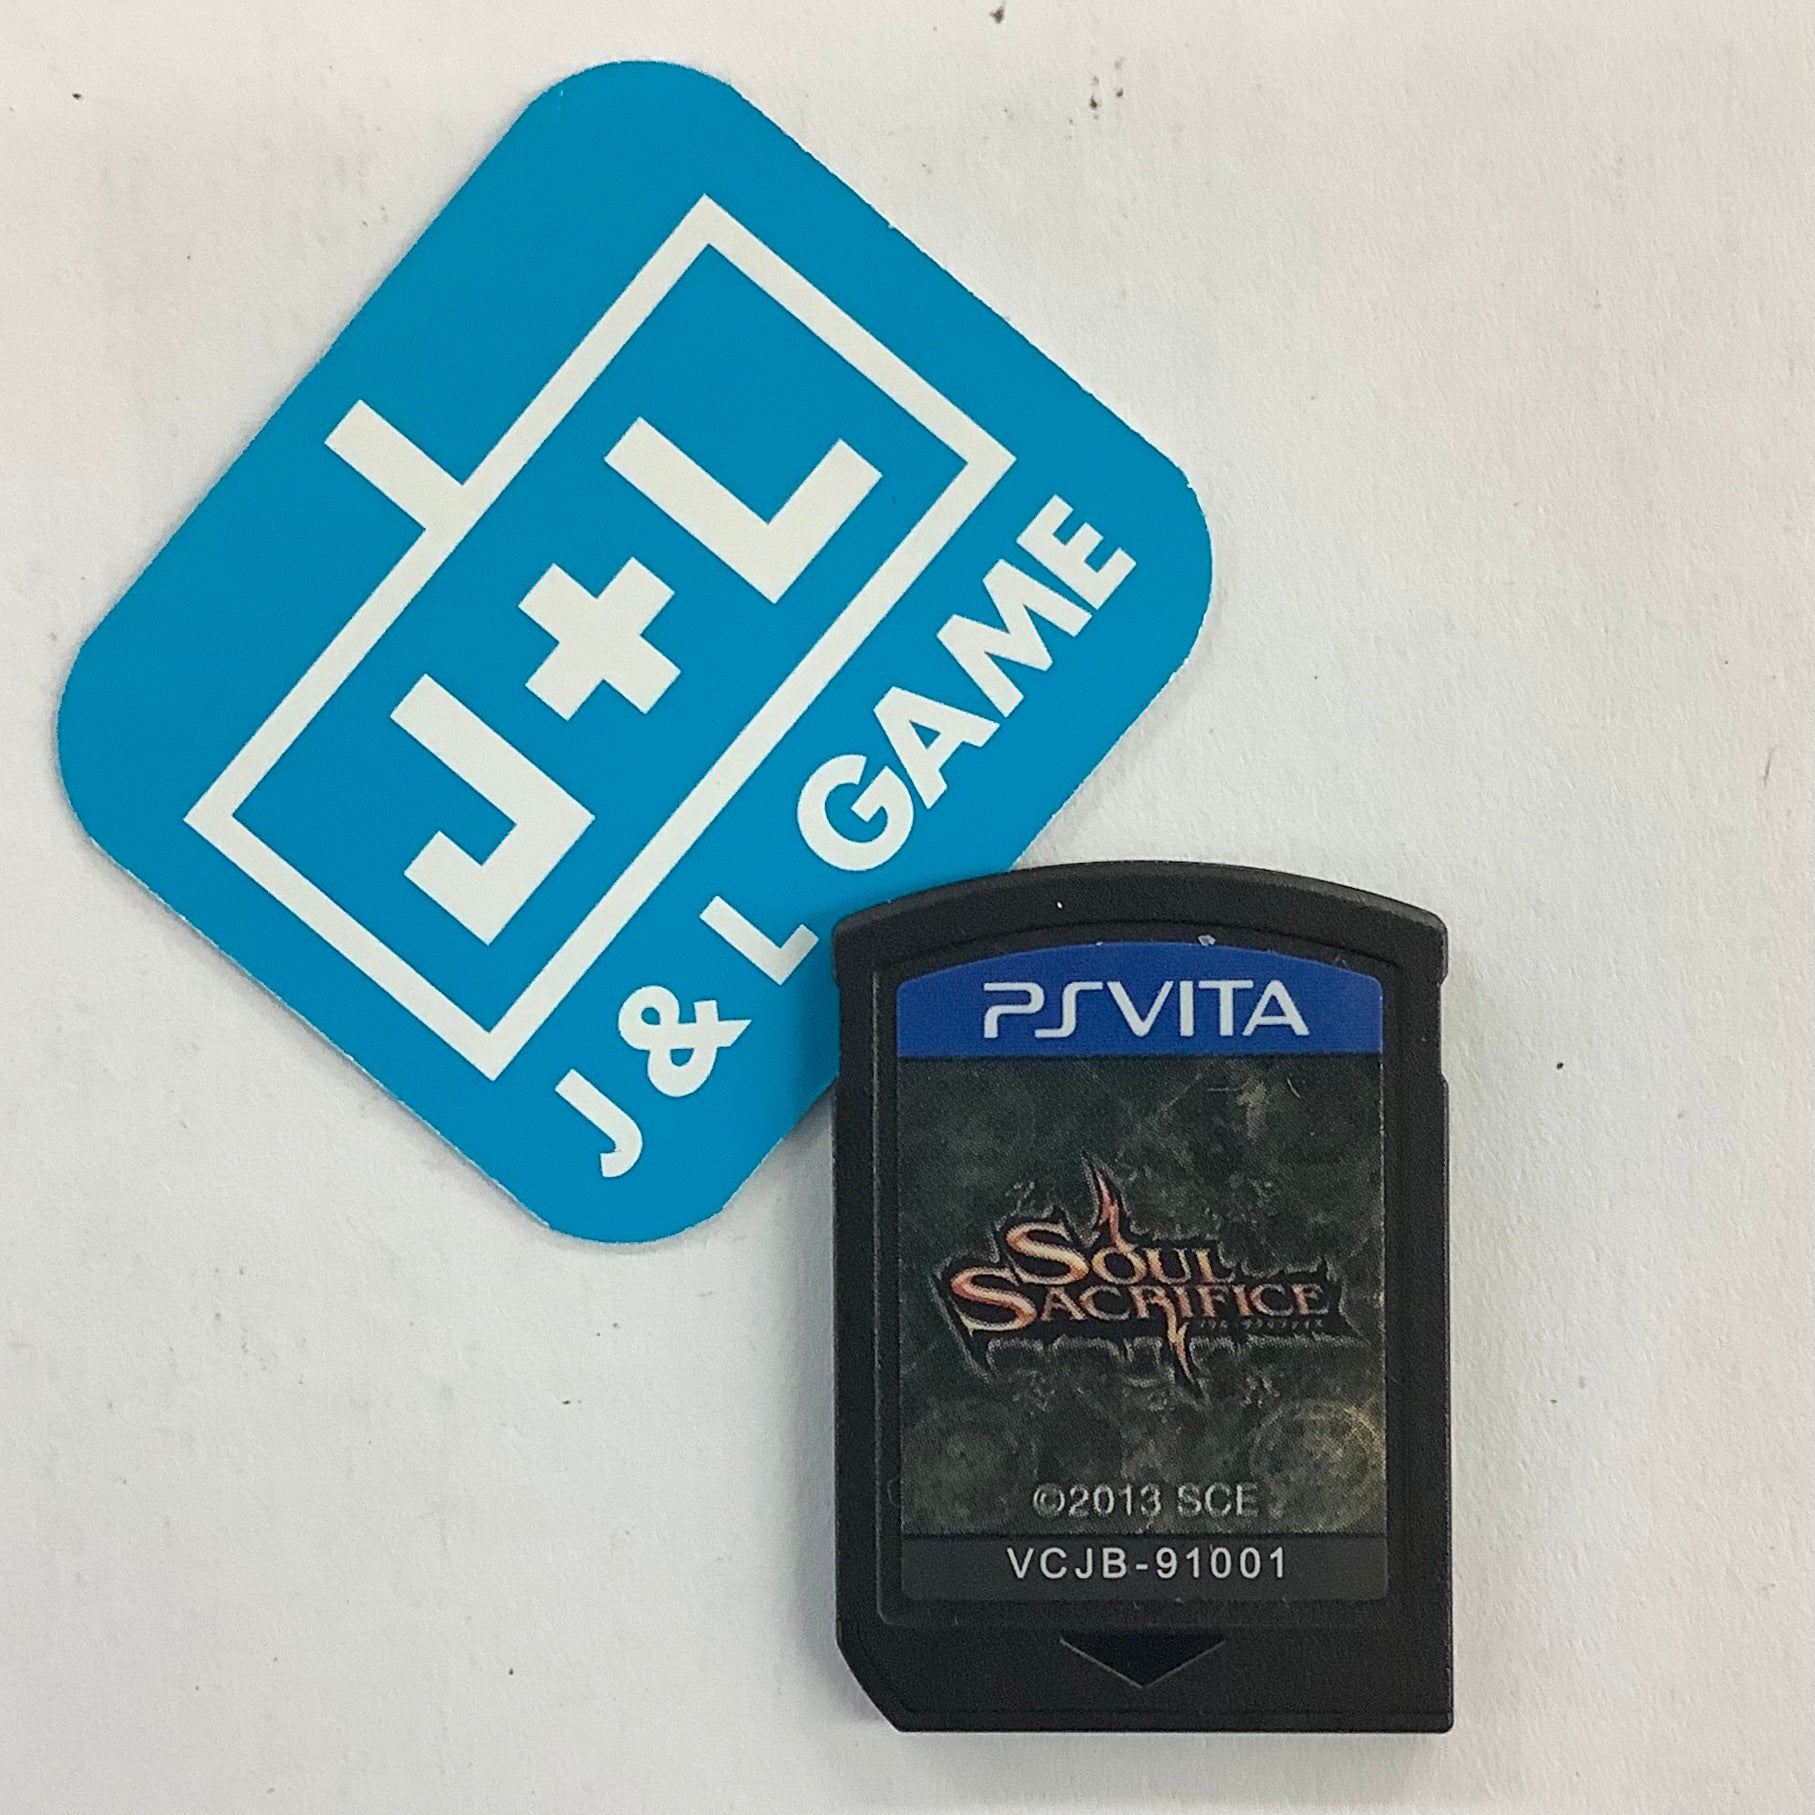 Soul Sacrifice - (PSV) PlayStation Vita [Pre-Owned] (Japanese Import) Video Games SCEI   